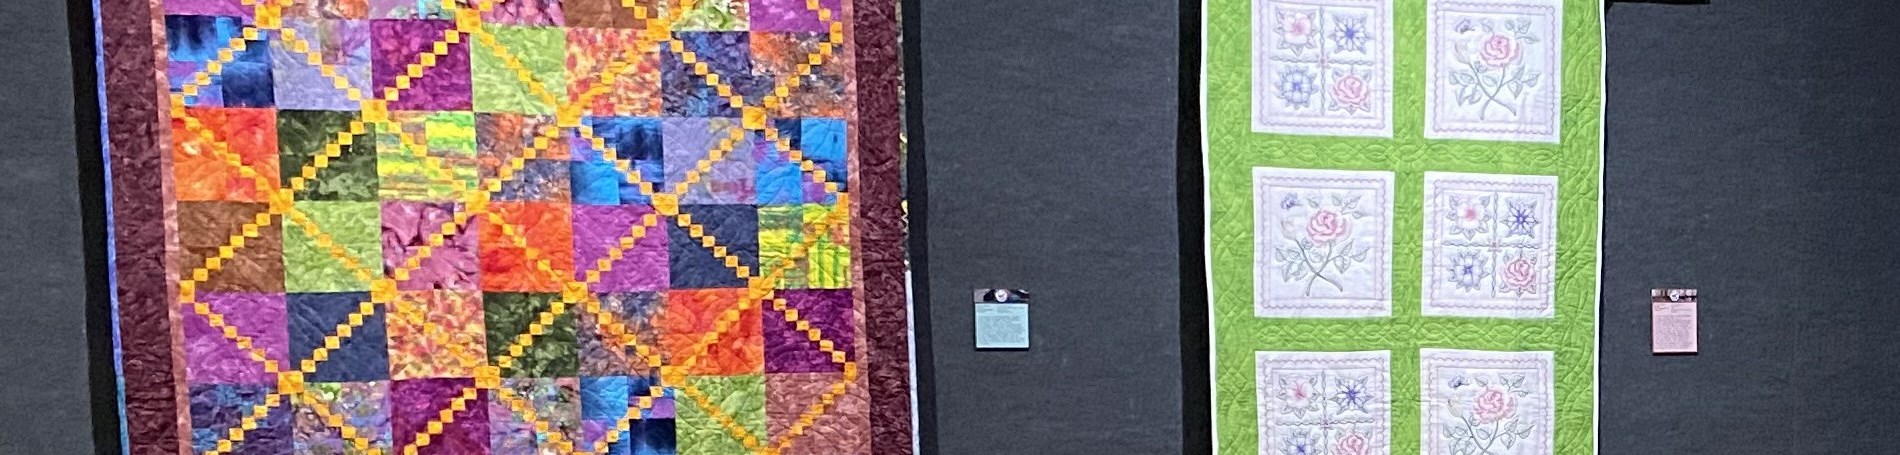 Quilts on Display